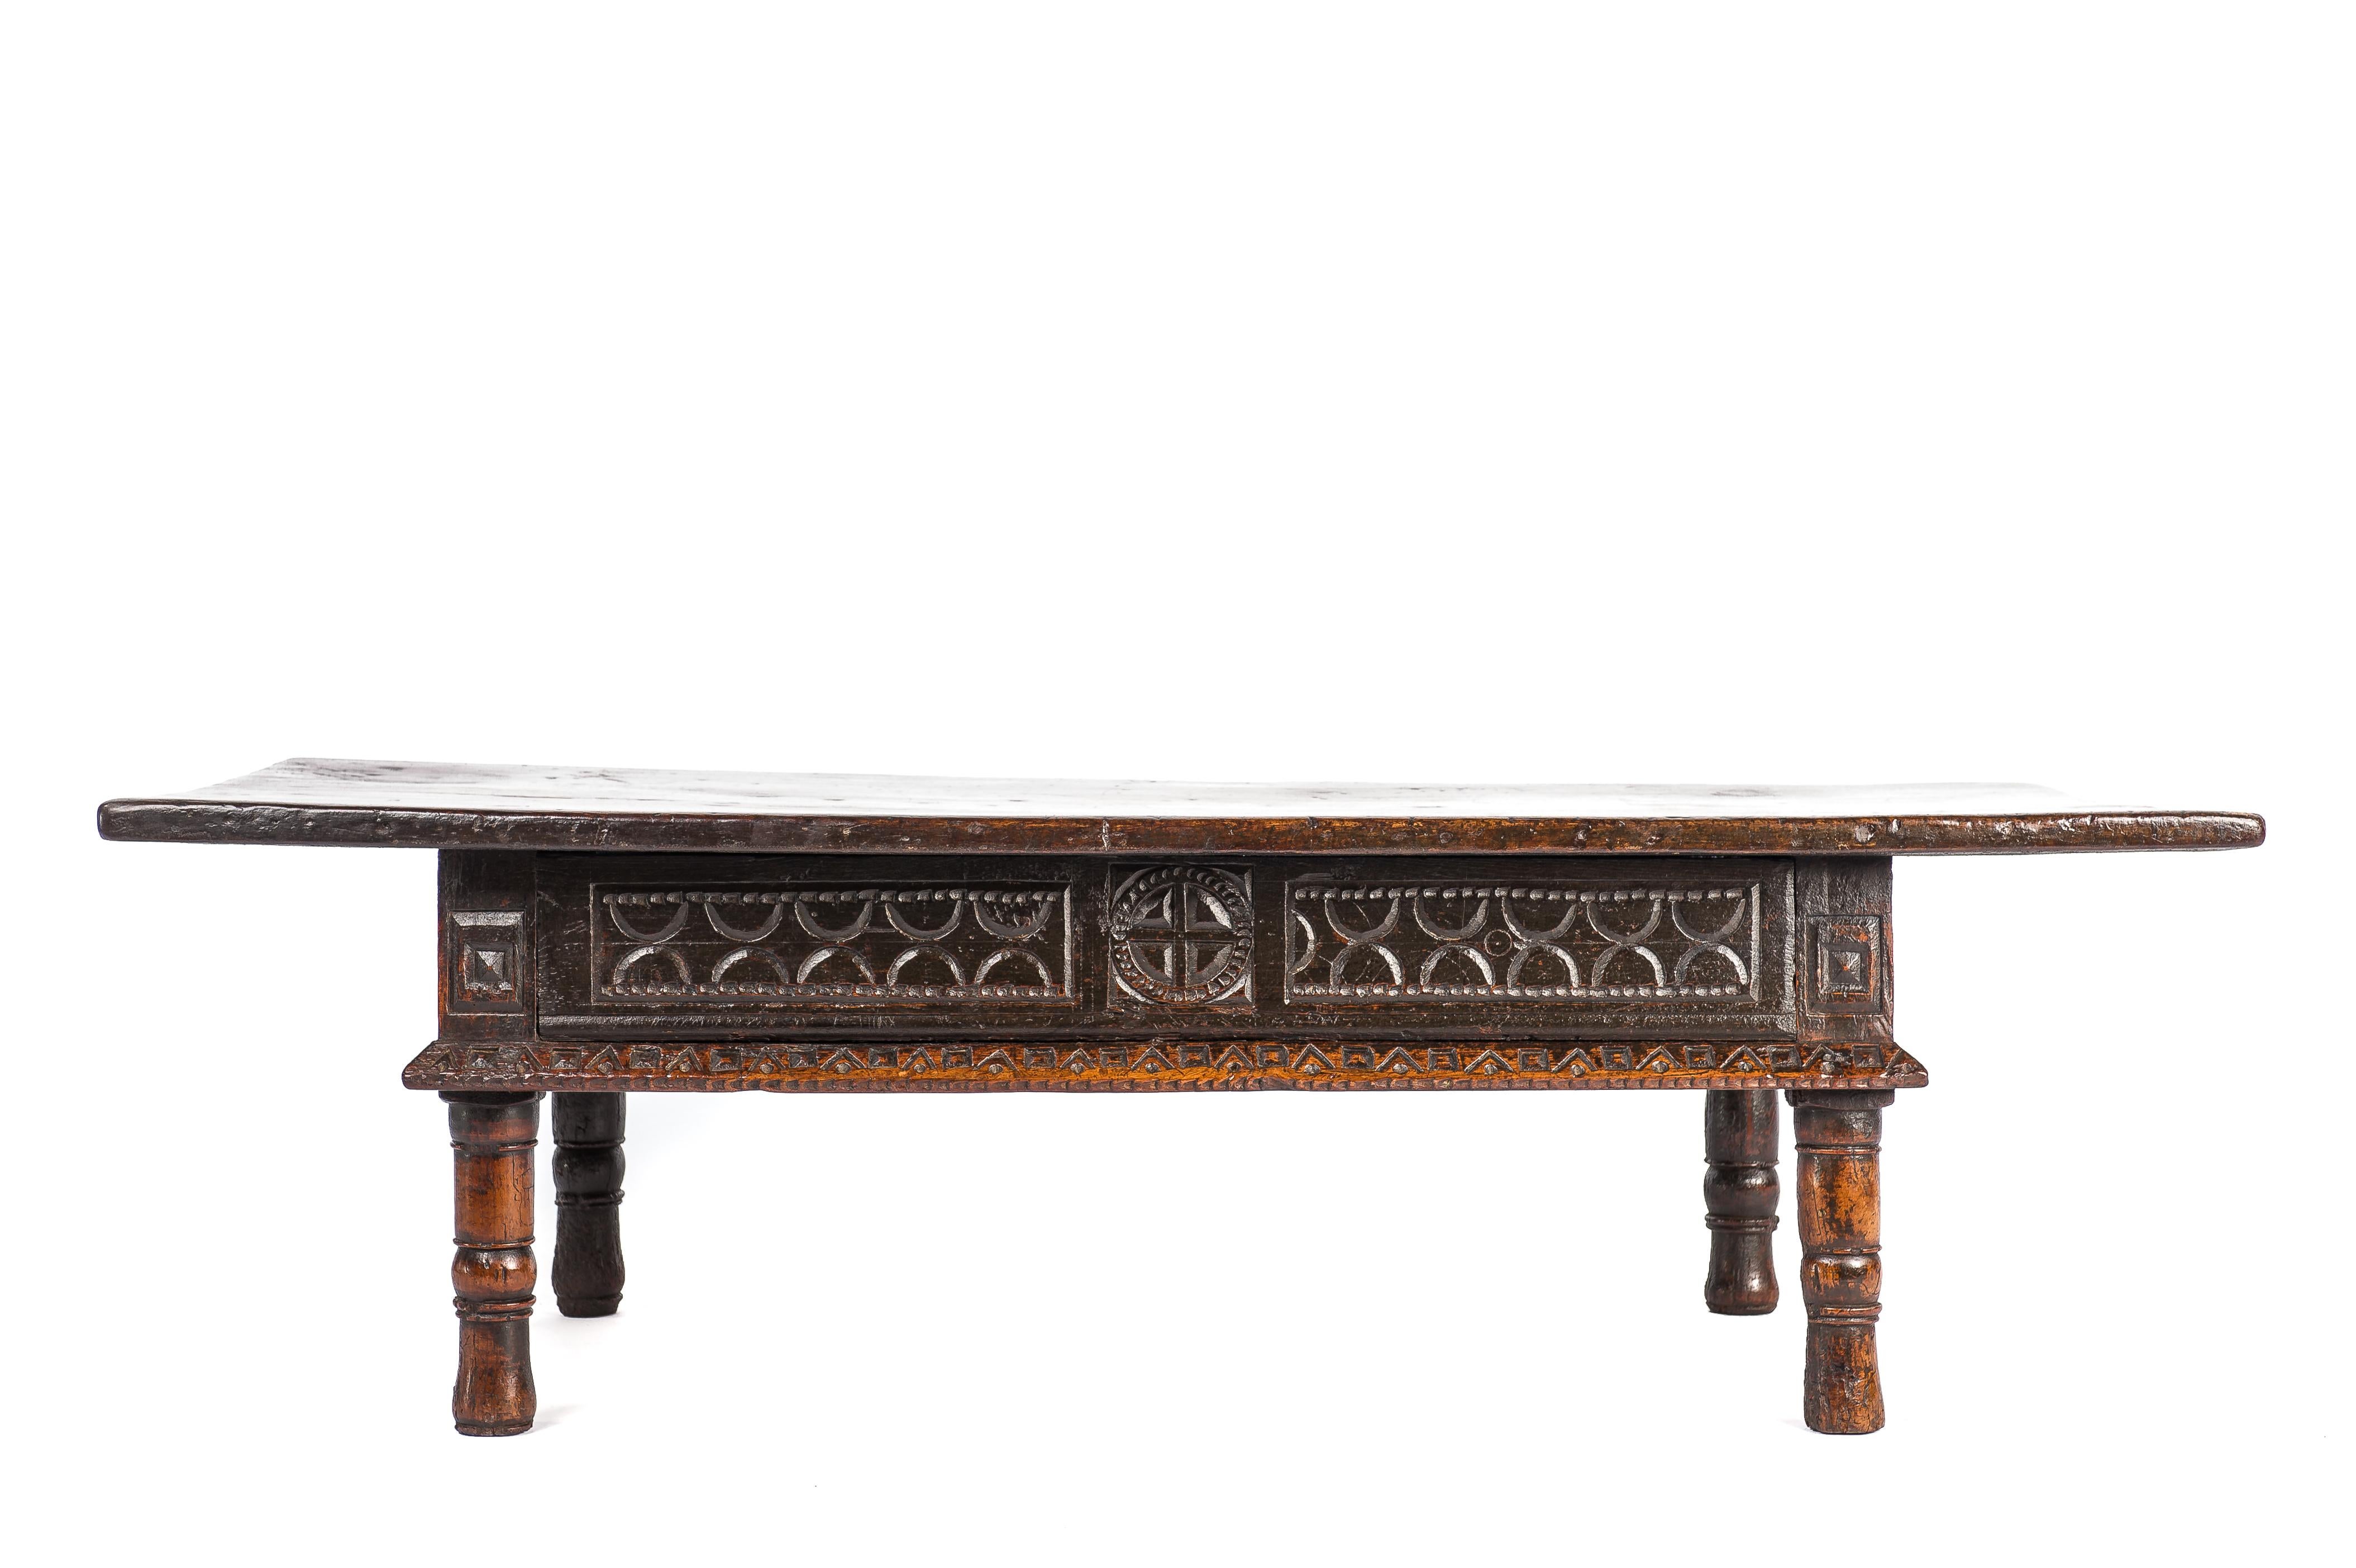 Steel Antique 17th Century Spanish Baroque Carved Chestnut Two Drawer Coffee Table